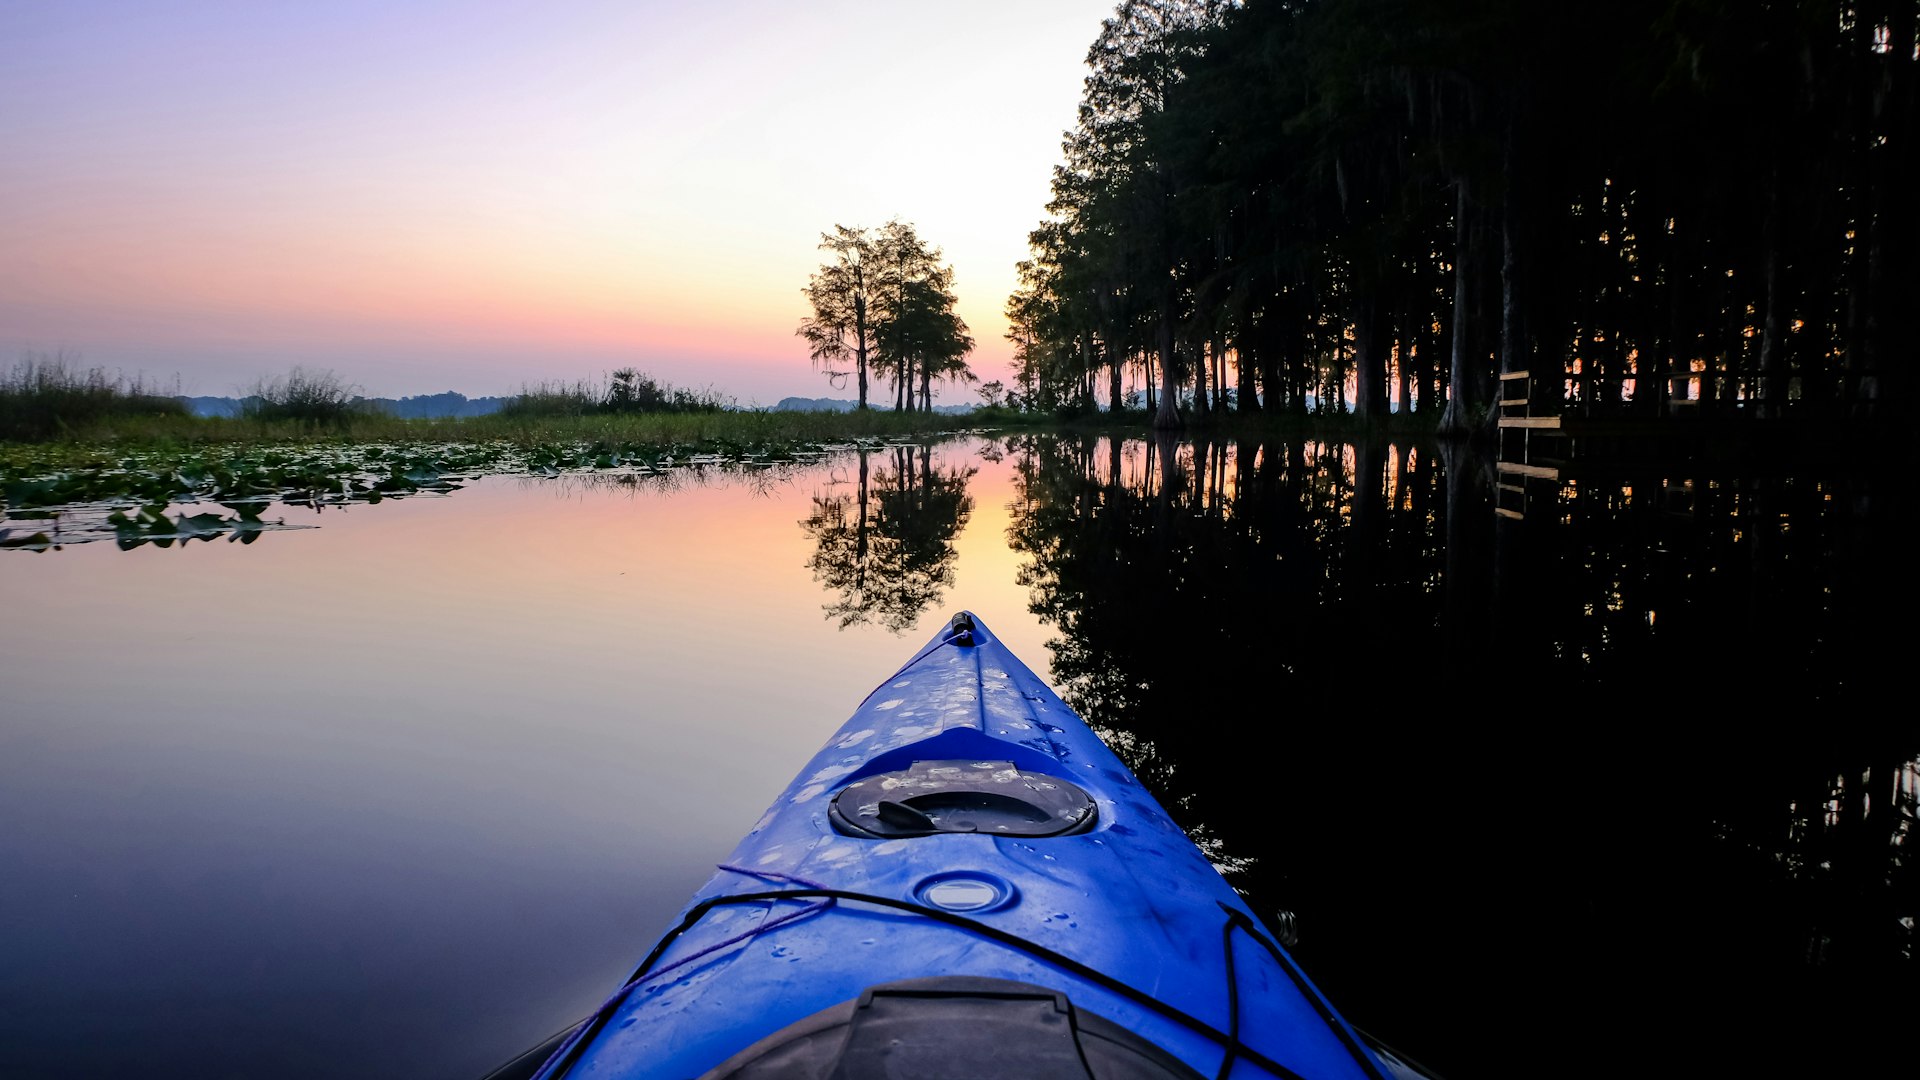 A photo taken from the front of a kayak of a peaceful lake at dusk